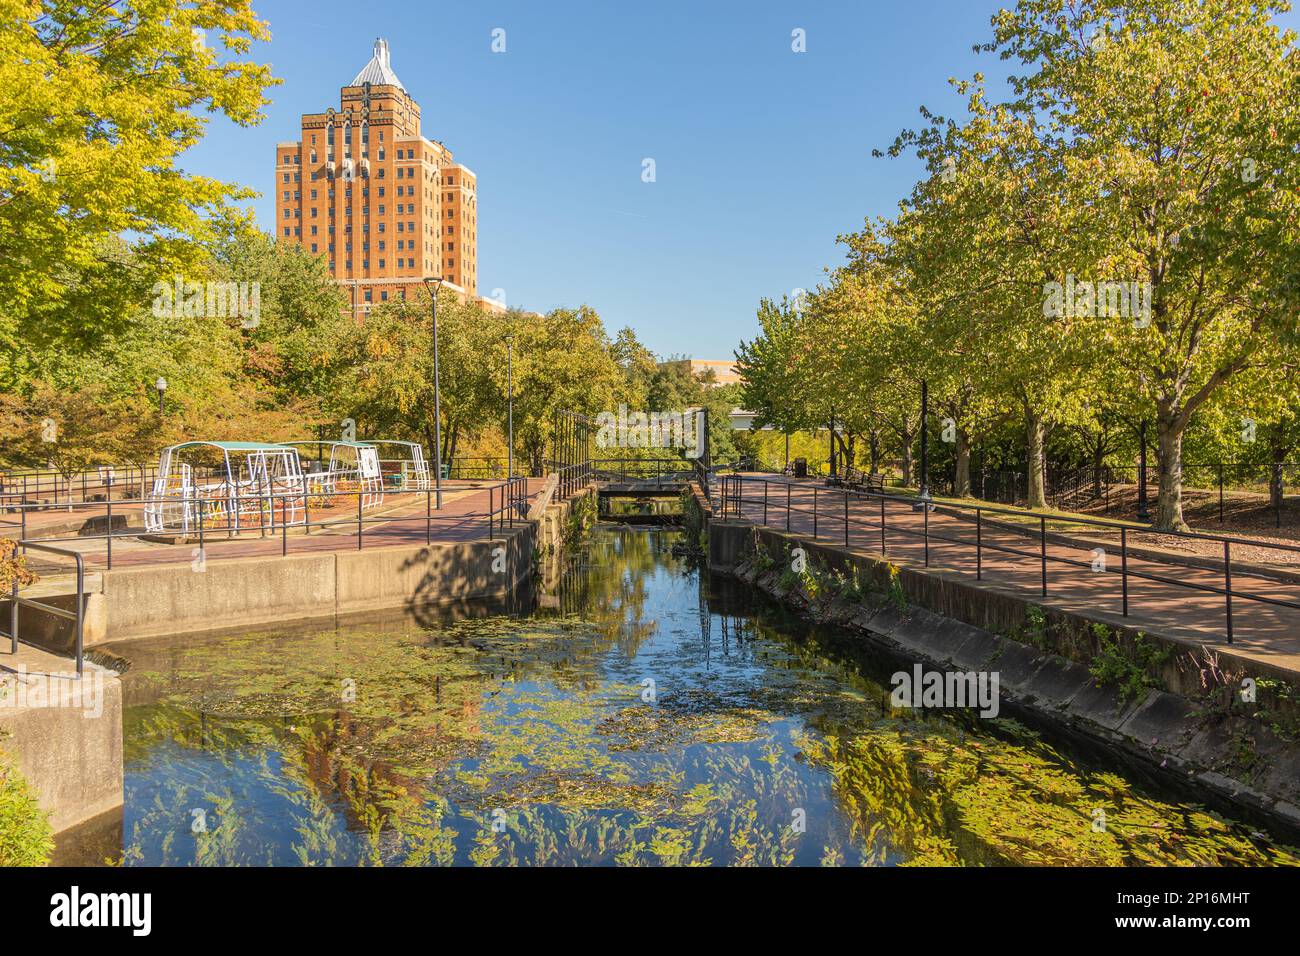 Erie Canal Lock located in the downtown area of the city of Akron, Ohio Stock Photo